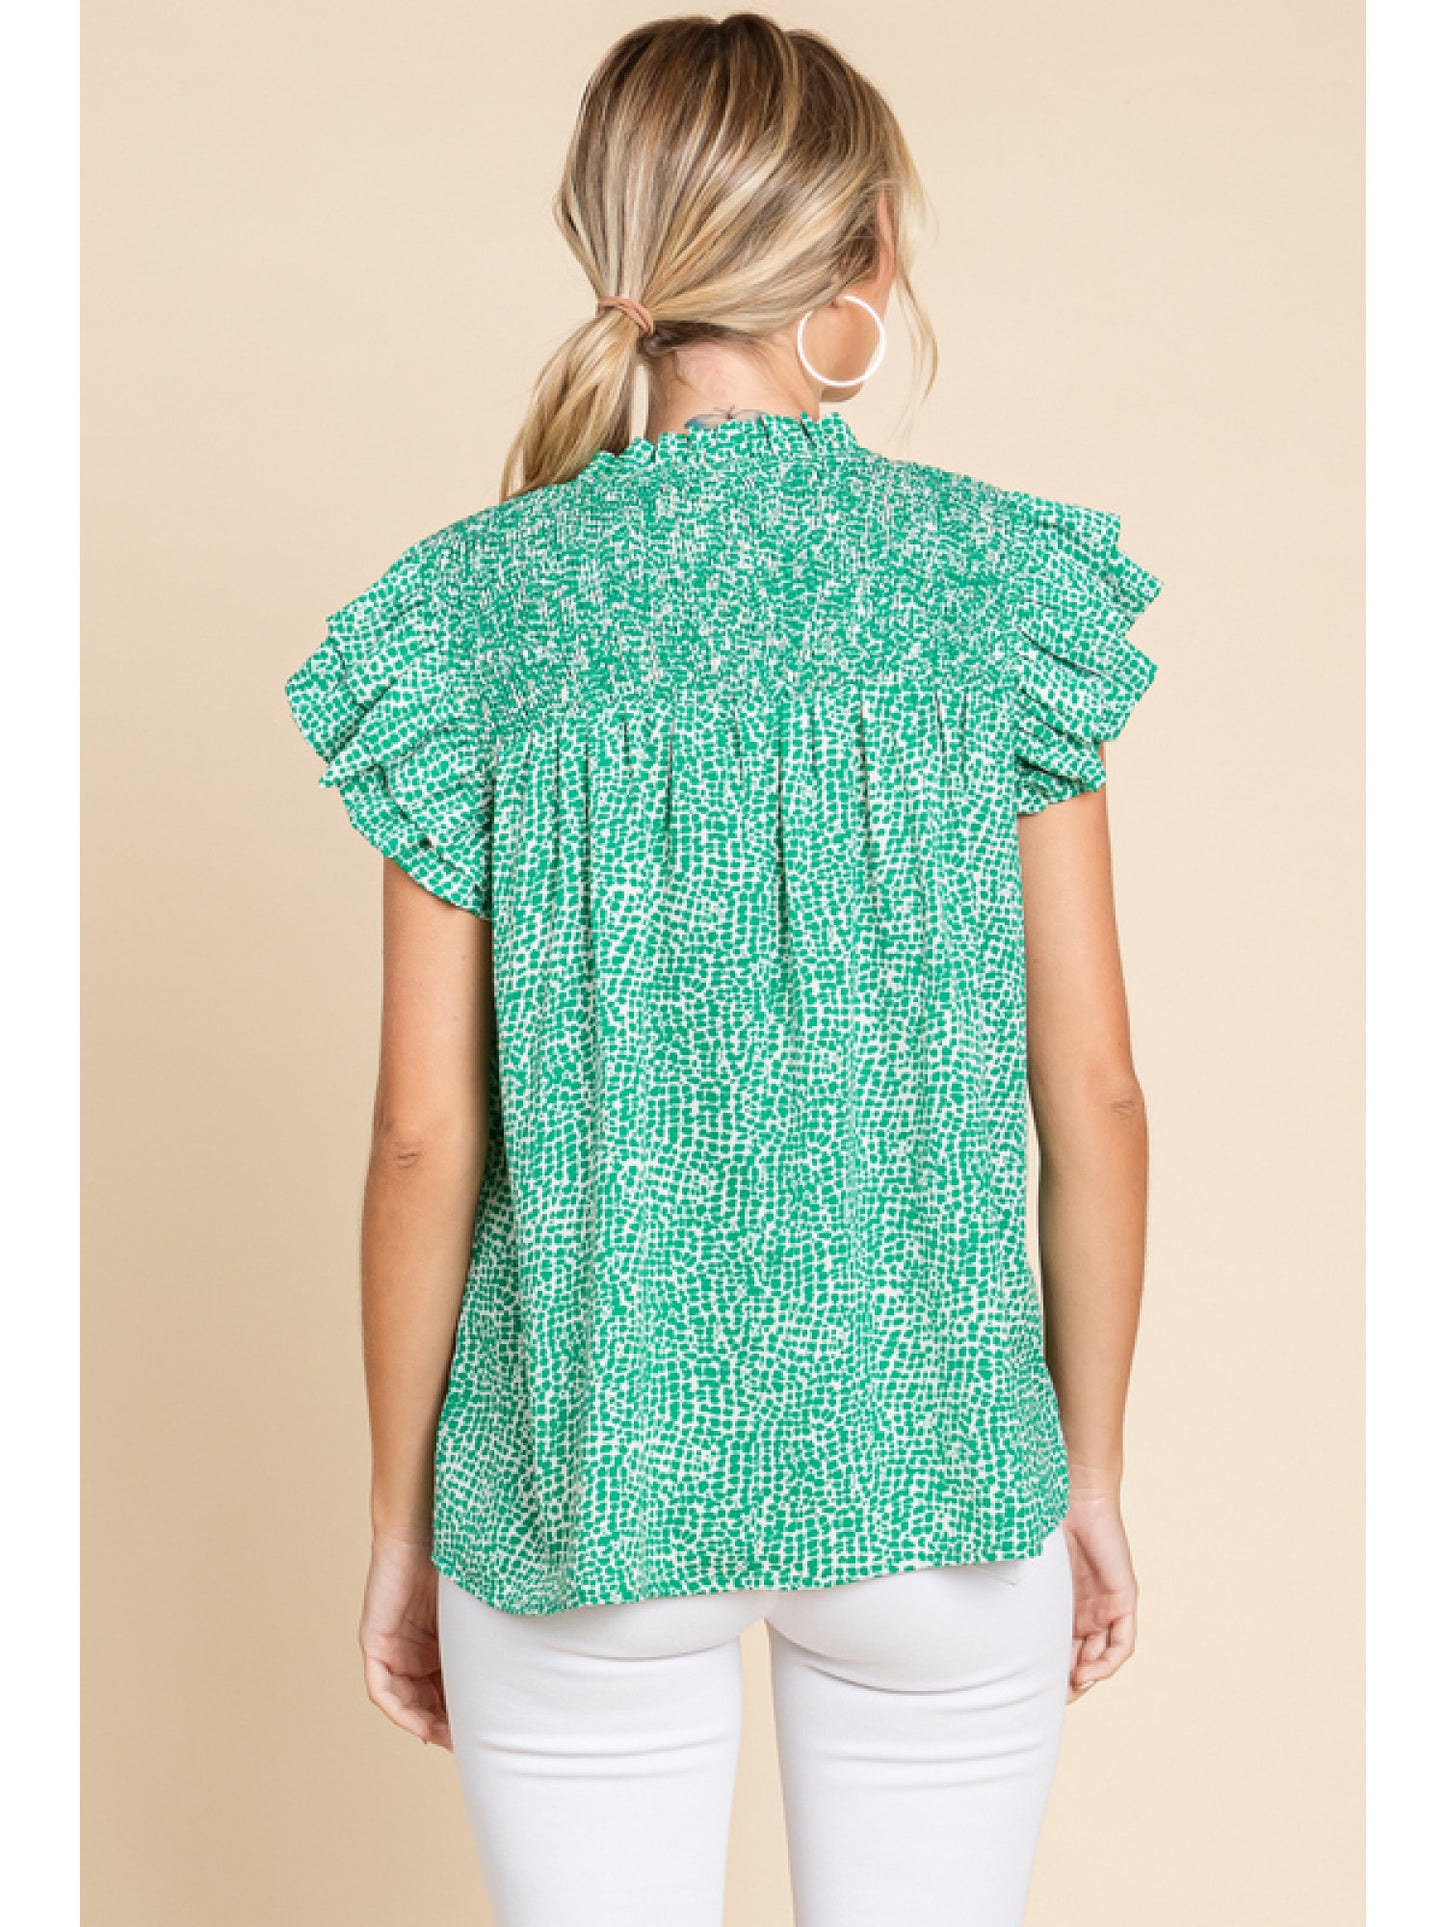 Crazy about the Frilled Top